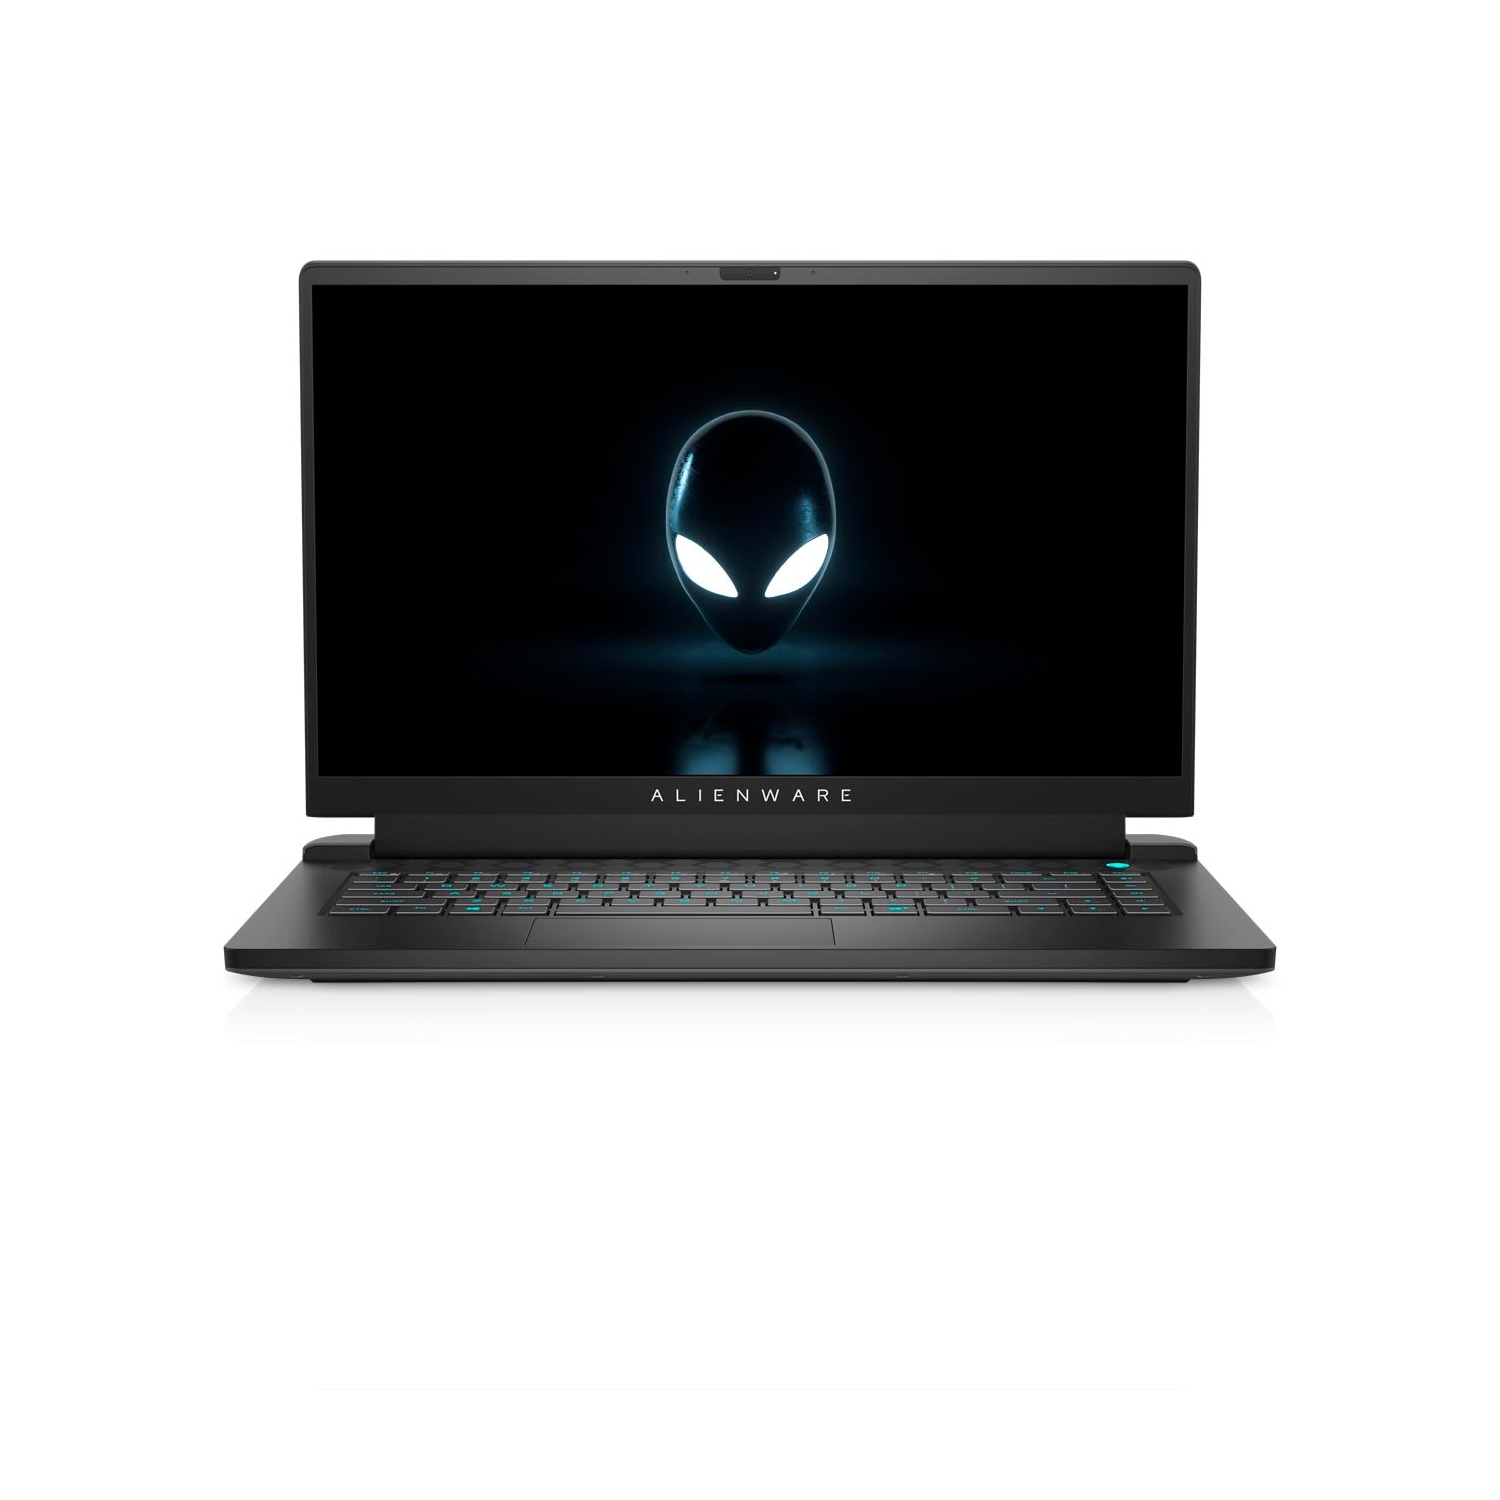 Refurbished (Excellent) - Dell Alienware m15 R5 Ryzen Edition Gaming Laptop (2021), 15.6" QHD, Core Ryzen 9, 512GB SSD, 32GB RAM, RTX 3070, 8 Cores @ 4.6 GHz Certified